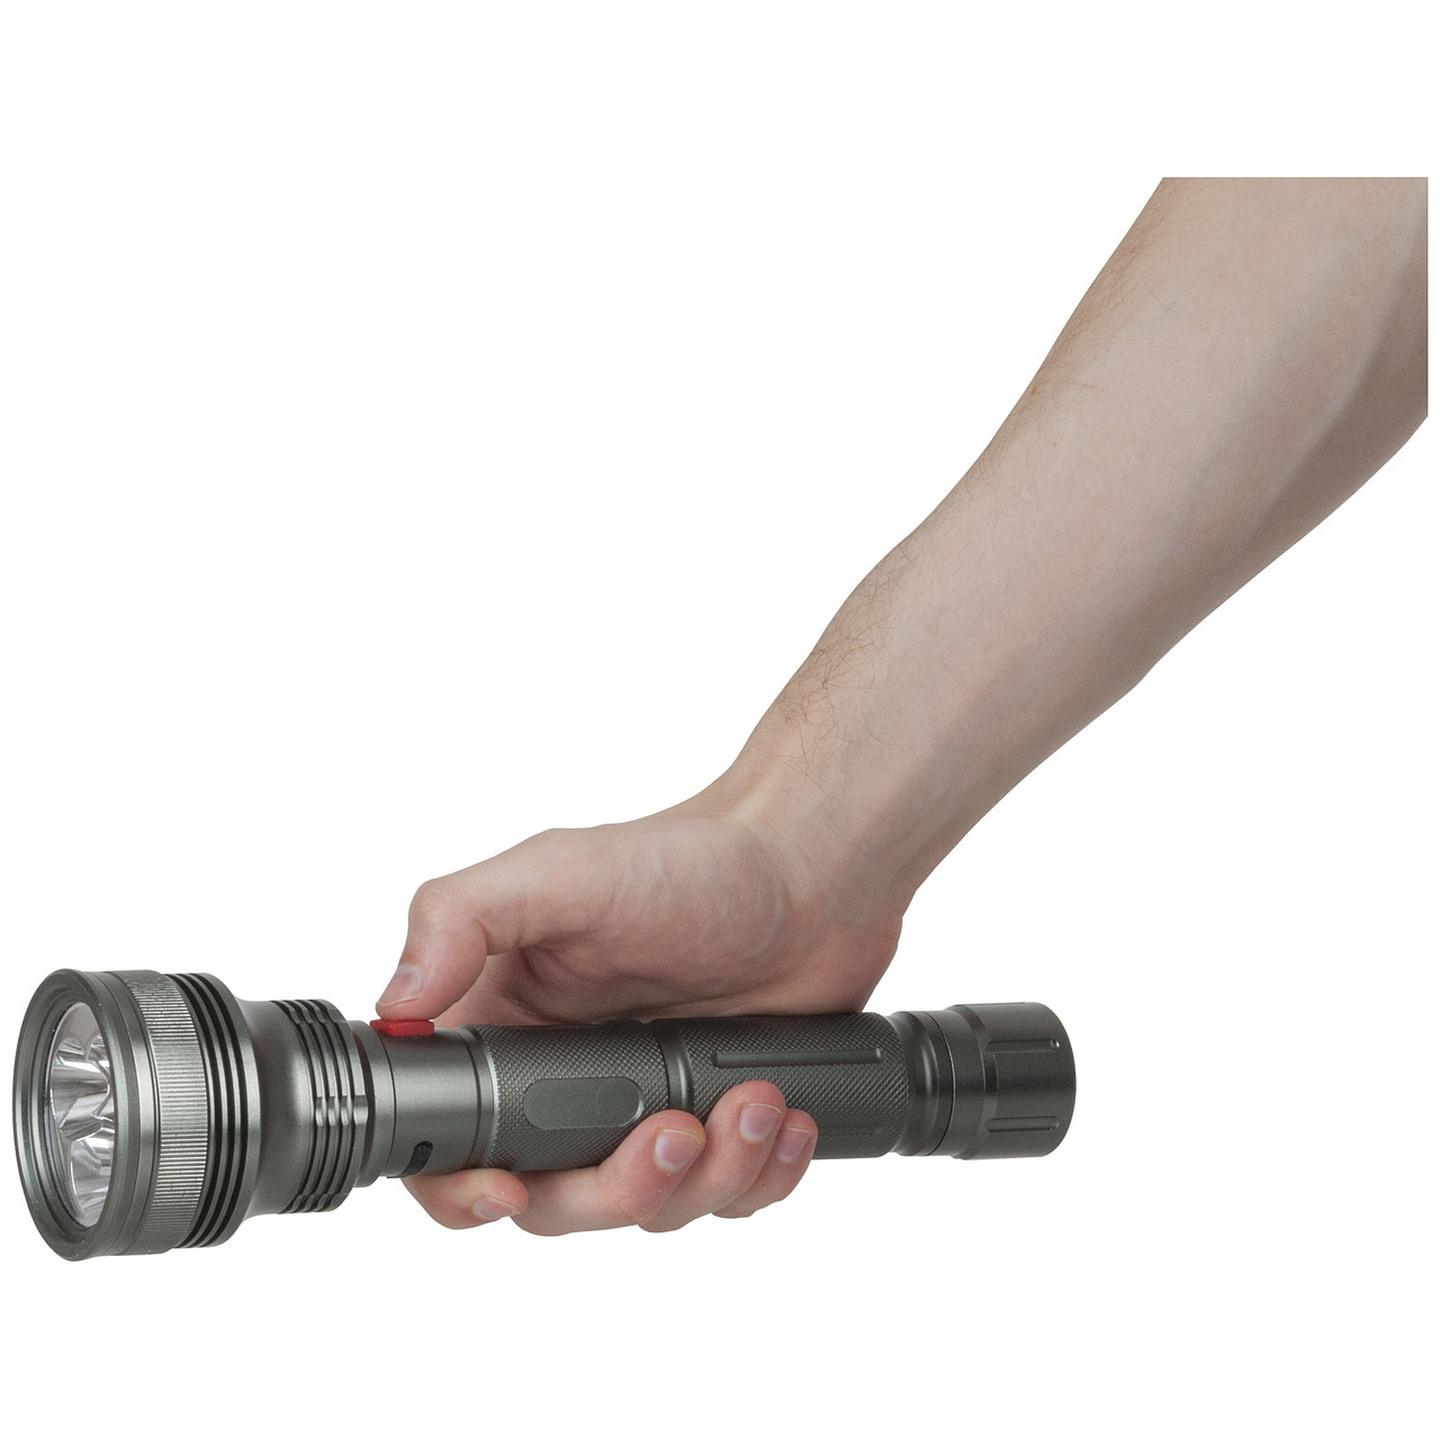 2500 Lumen rechargeable LED torch